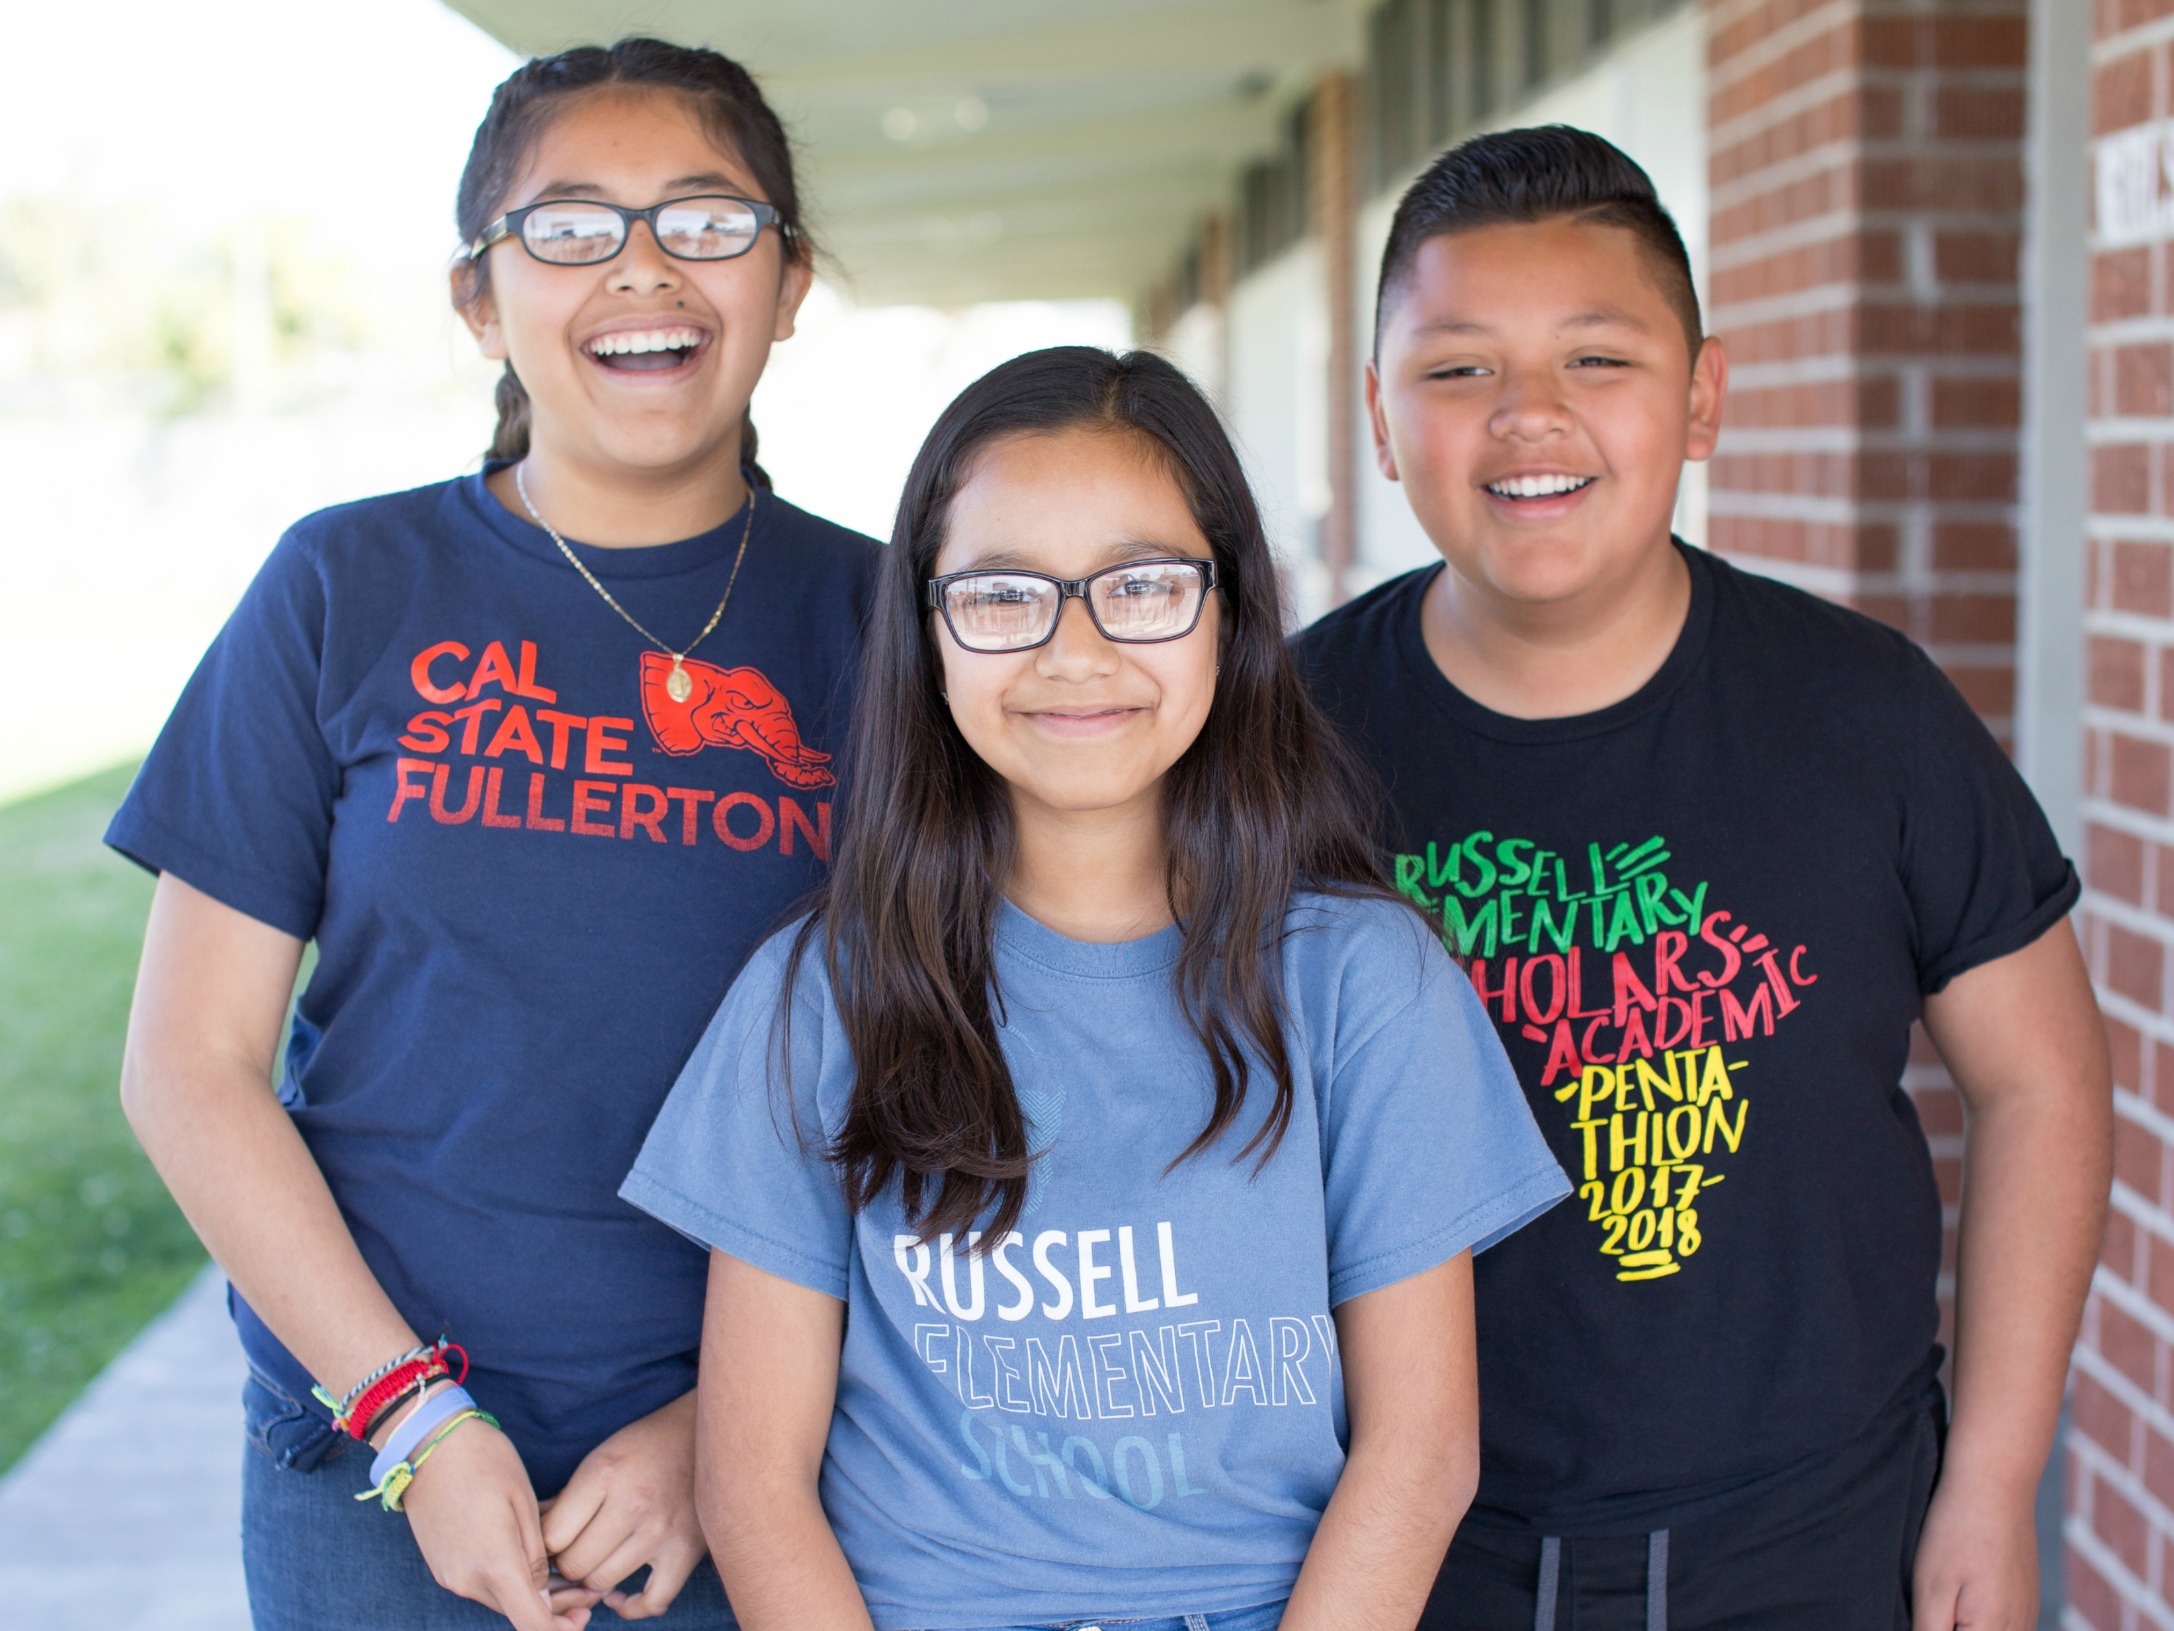 Three students from Russell Elementary School